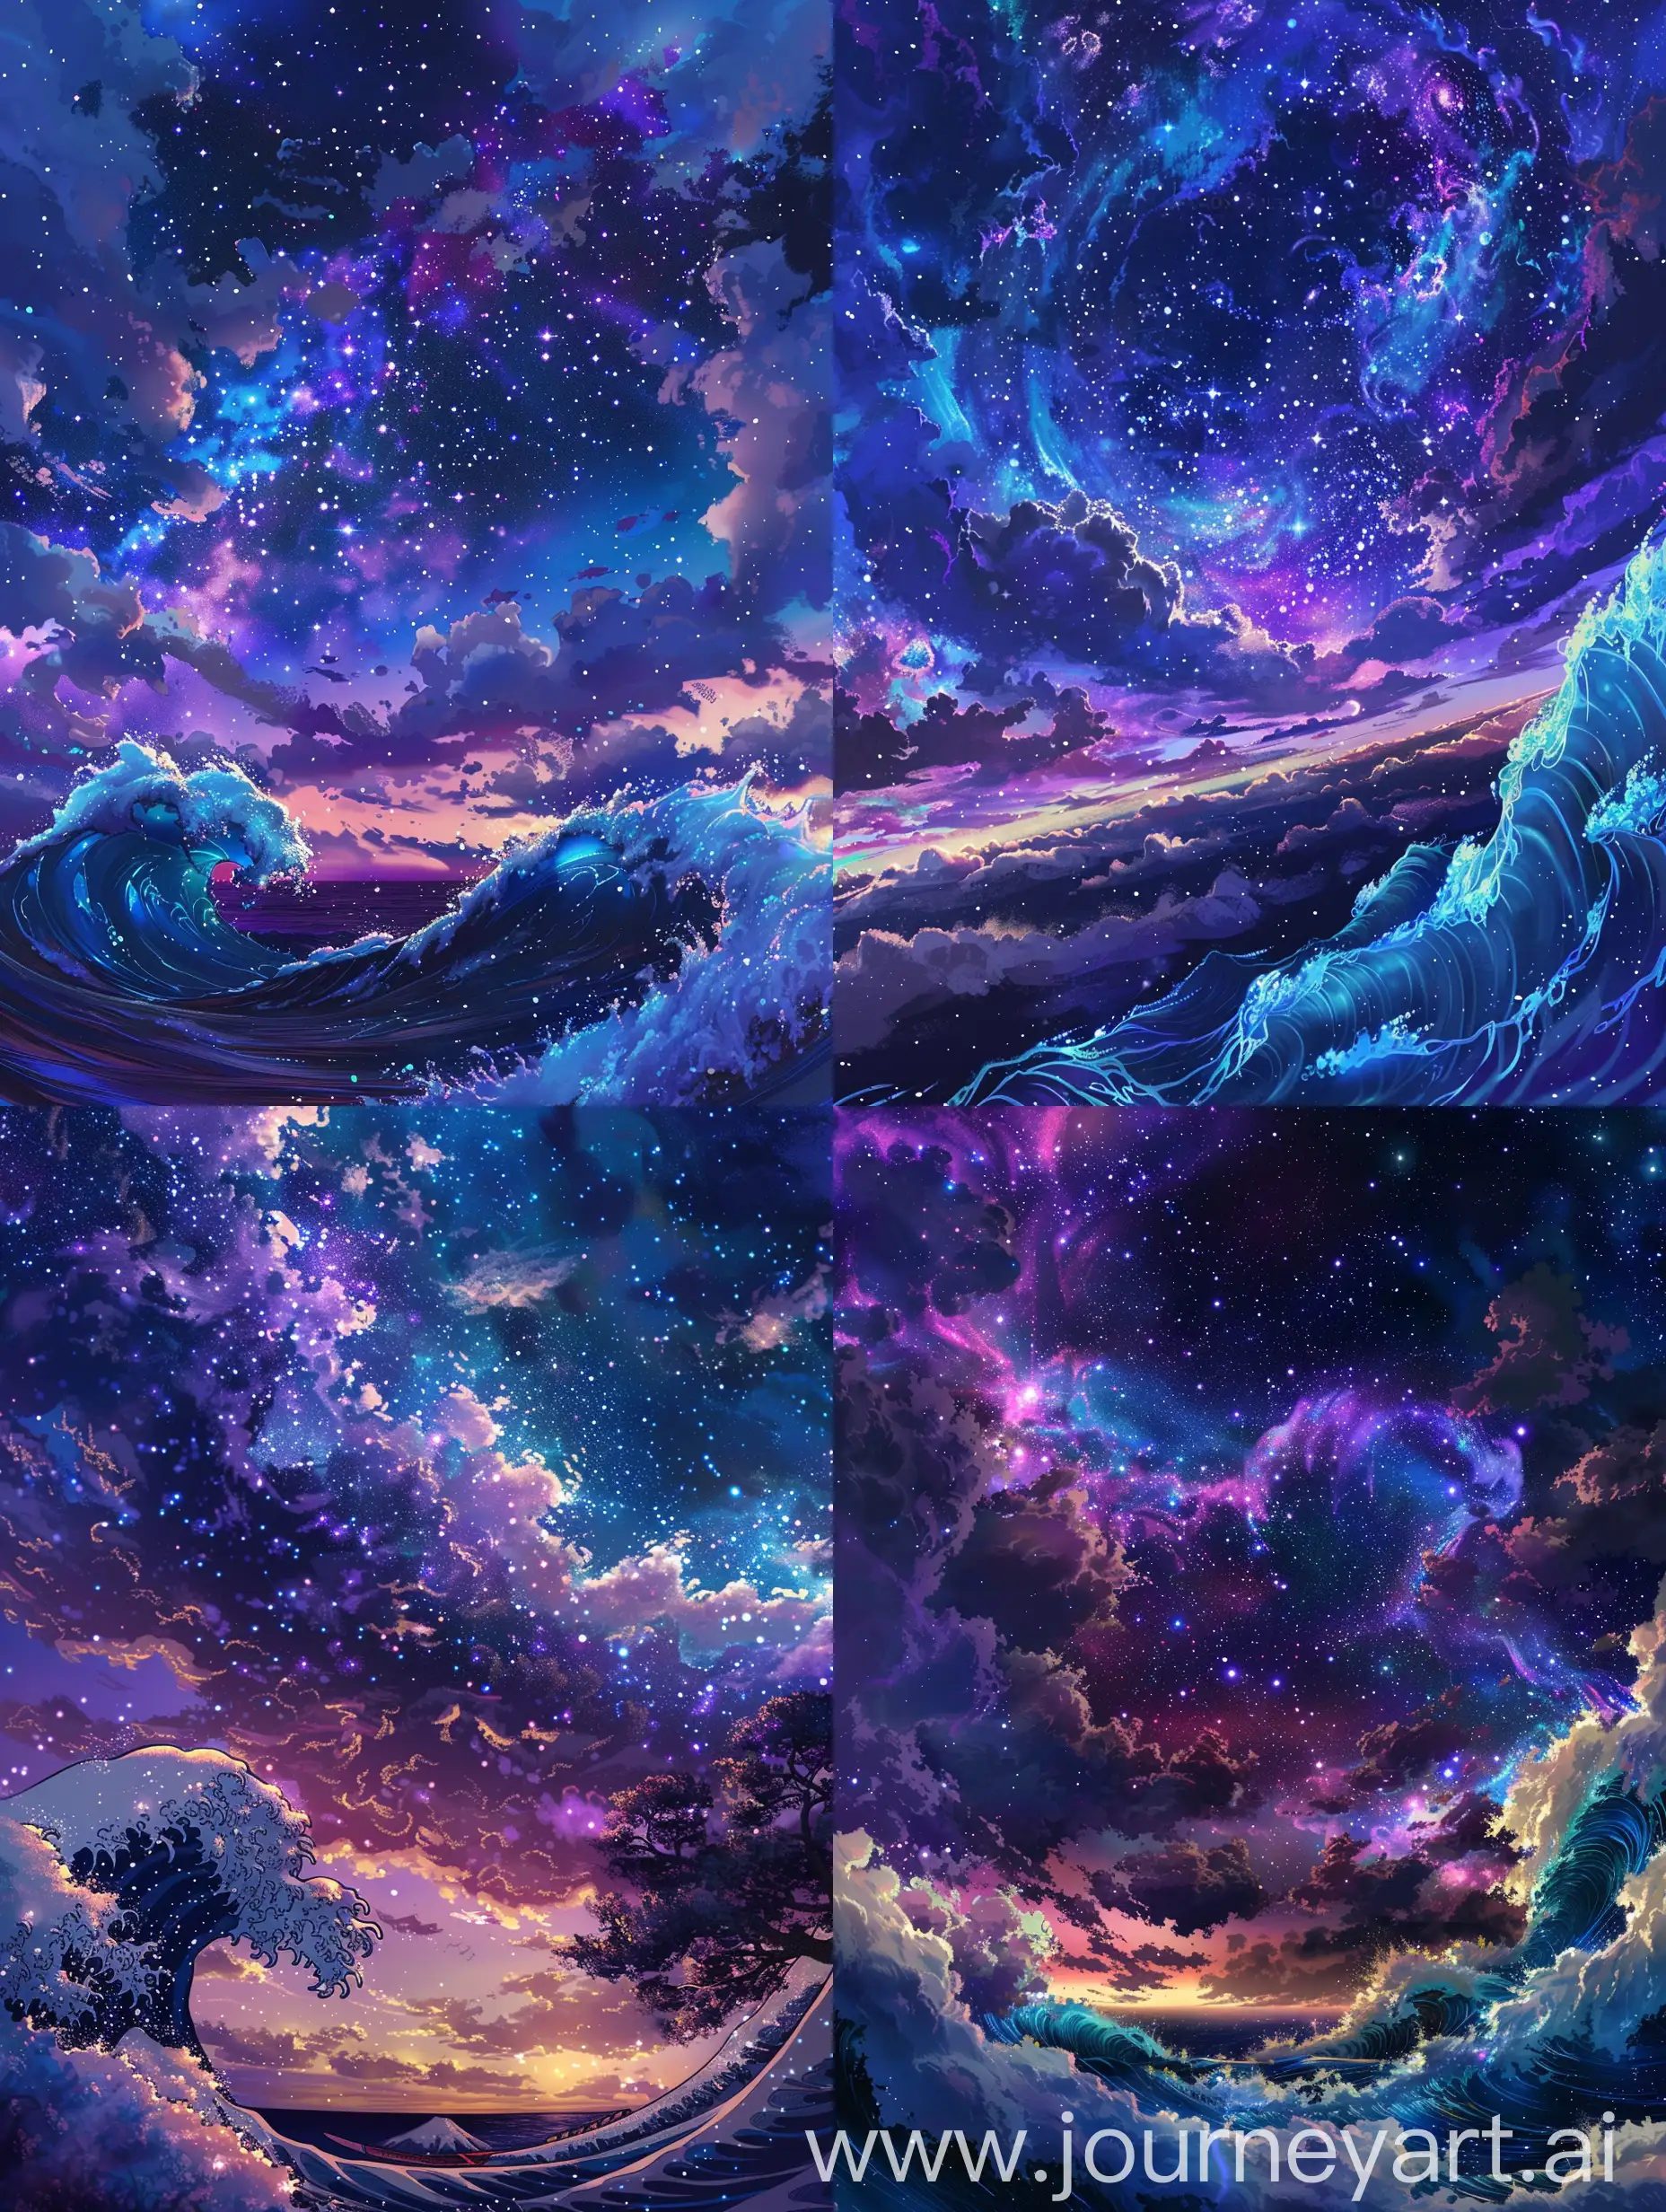 Anime style,realism but still stylized,bit of msjato shinkai style touch,The night sky depicted in the image you shared is described as a surreal and vibrant canvas, teeming with stars and nebulae that cast purple and blue hues. A wave-like cloud formation swirls through the starry expanse, adding to the fantastical atmosphere. enhanced portrayal of the night sky evokes a sense of wonder and the infinite beauty of the cosmos.